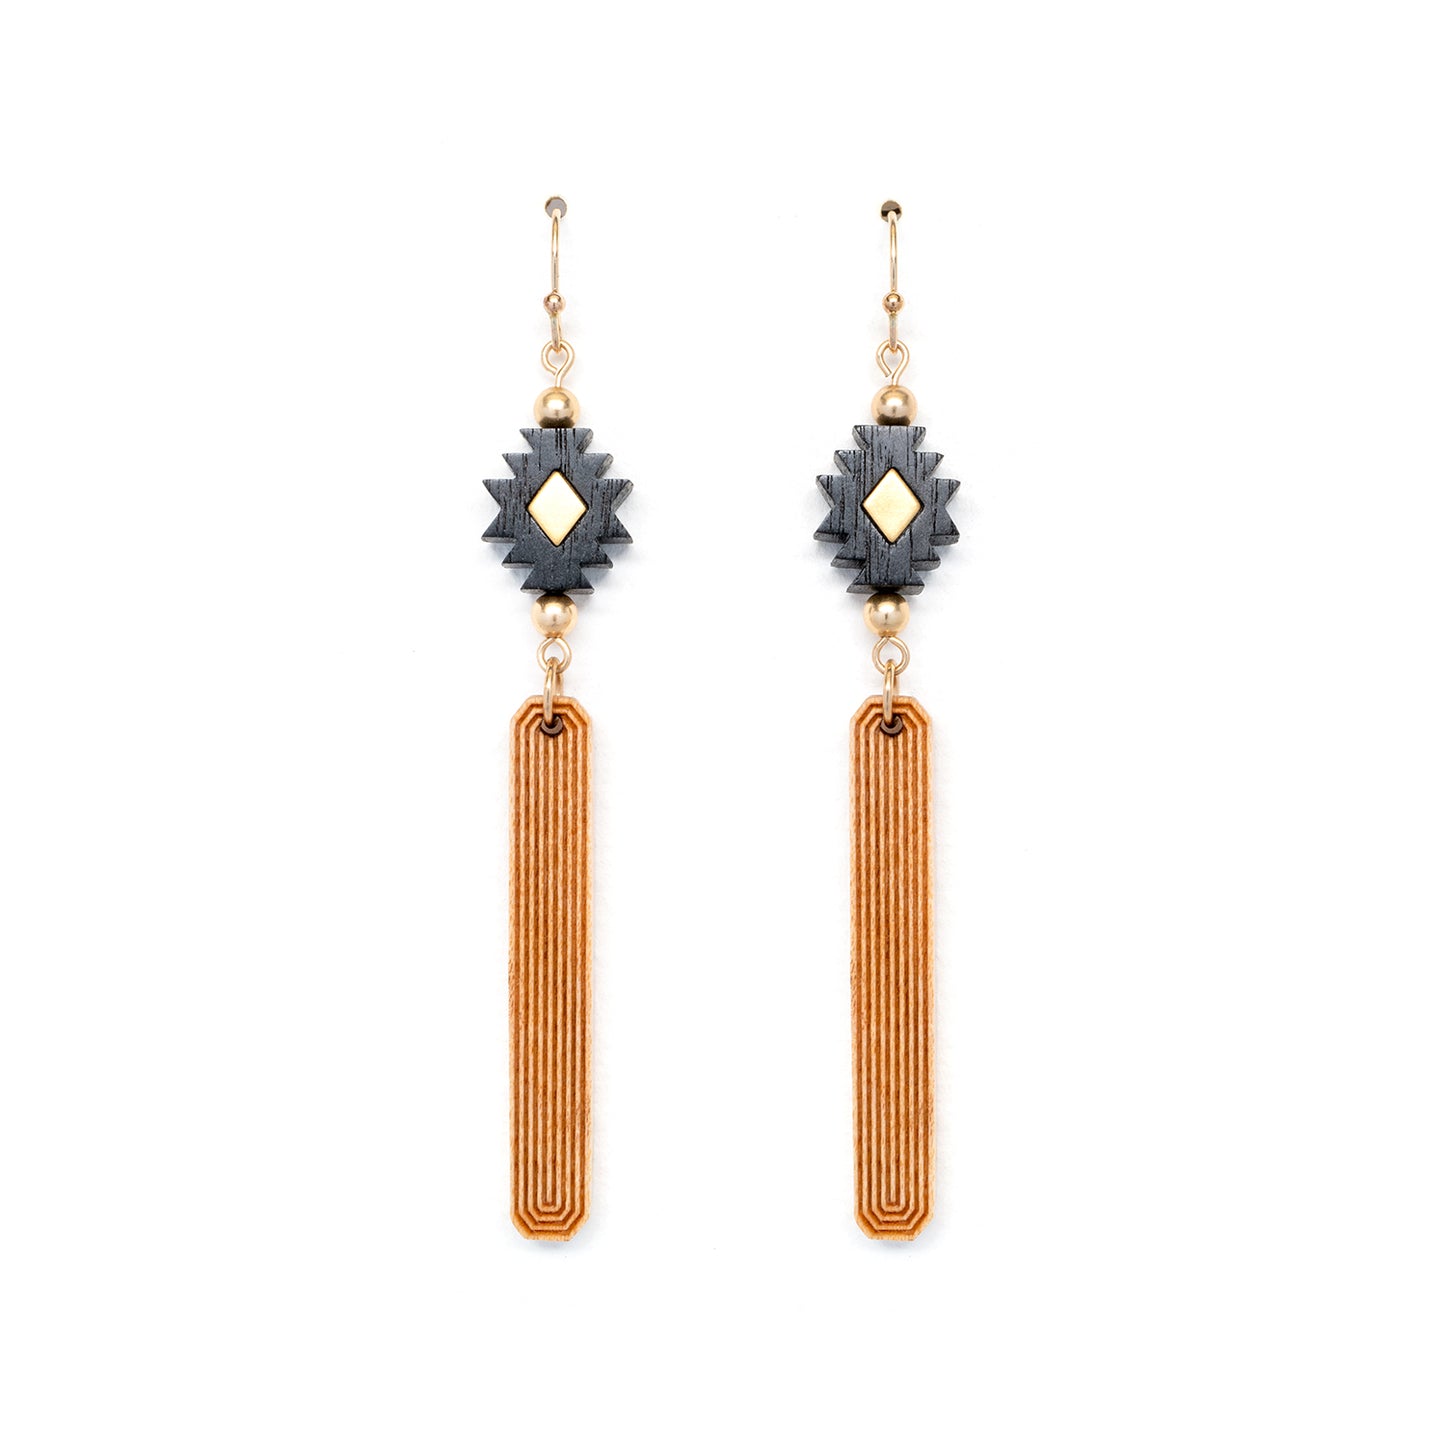 Black, gold and natural wood colored earrings made from laser carved wood laying flat on white backgound.